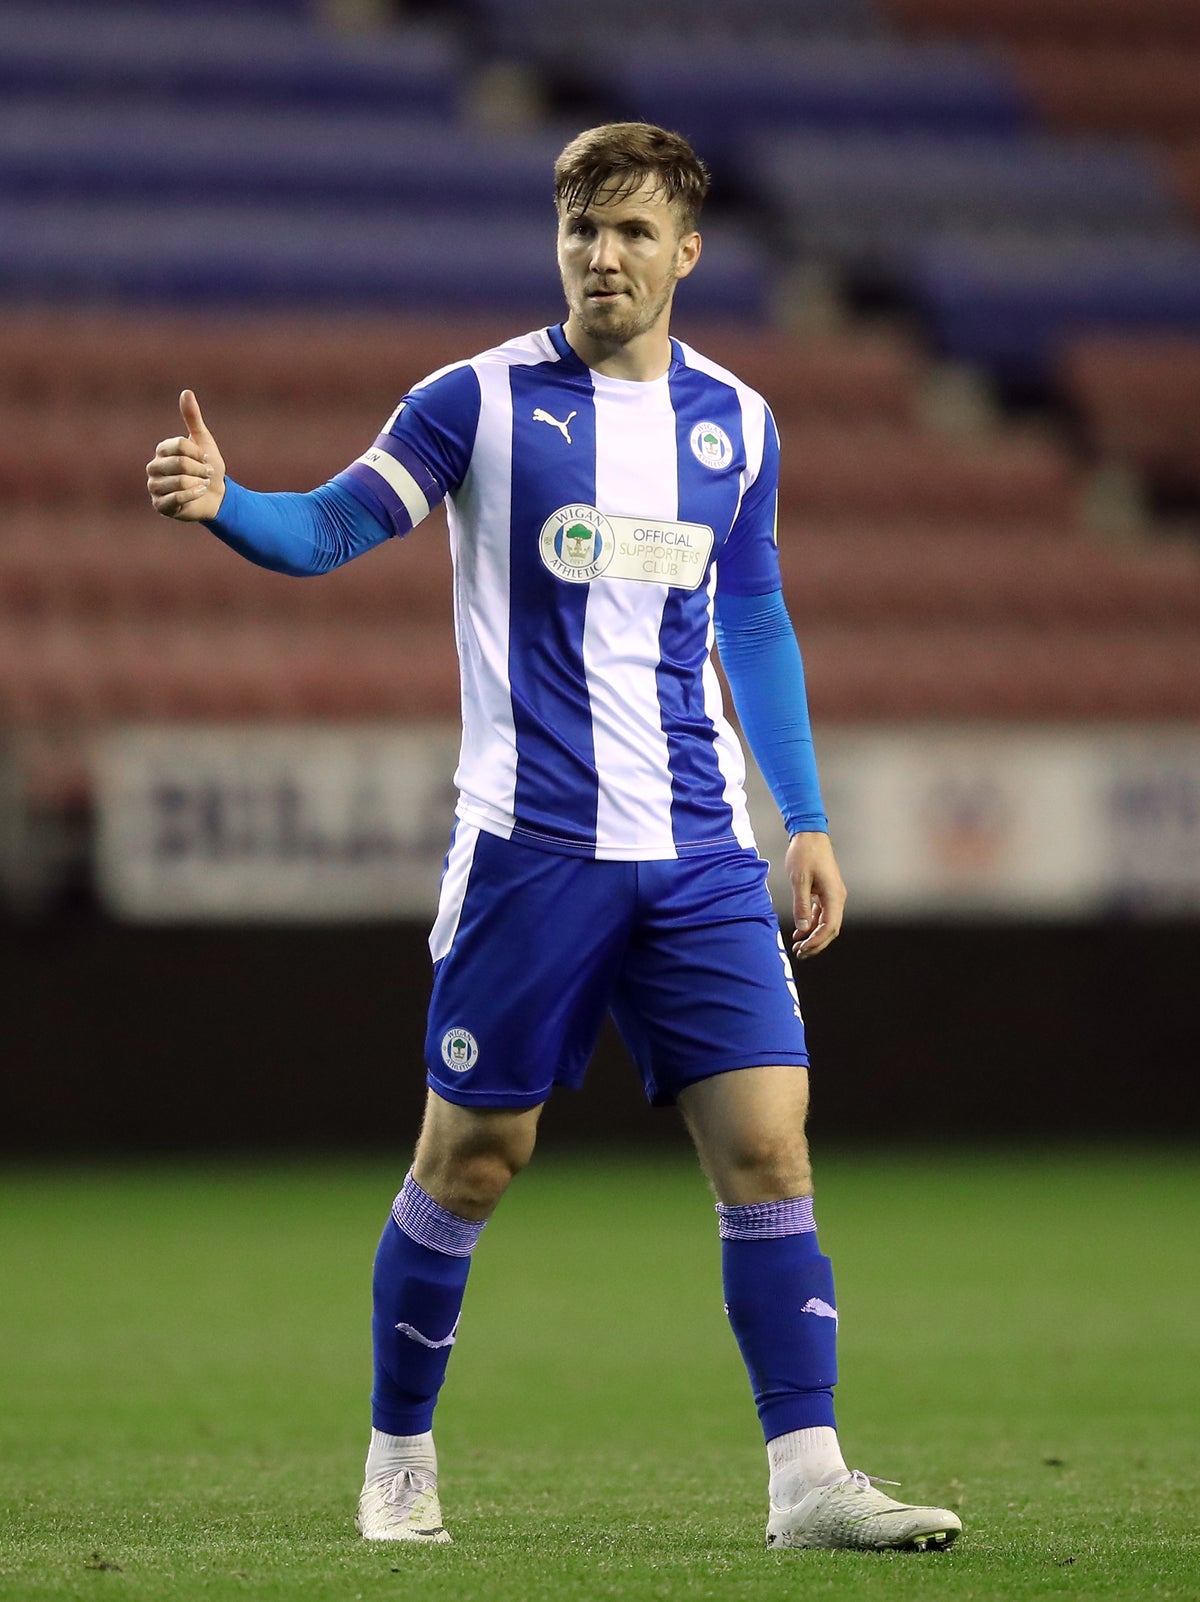 Lee Evans agrees move to Ipswich from Wigan | The Independent